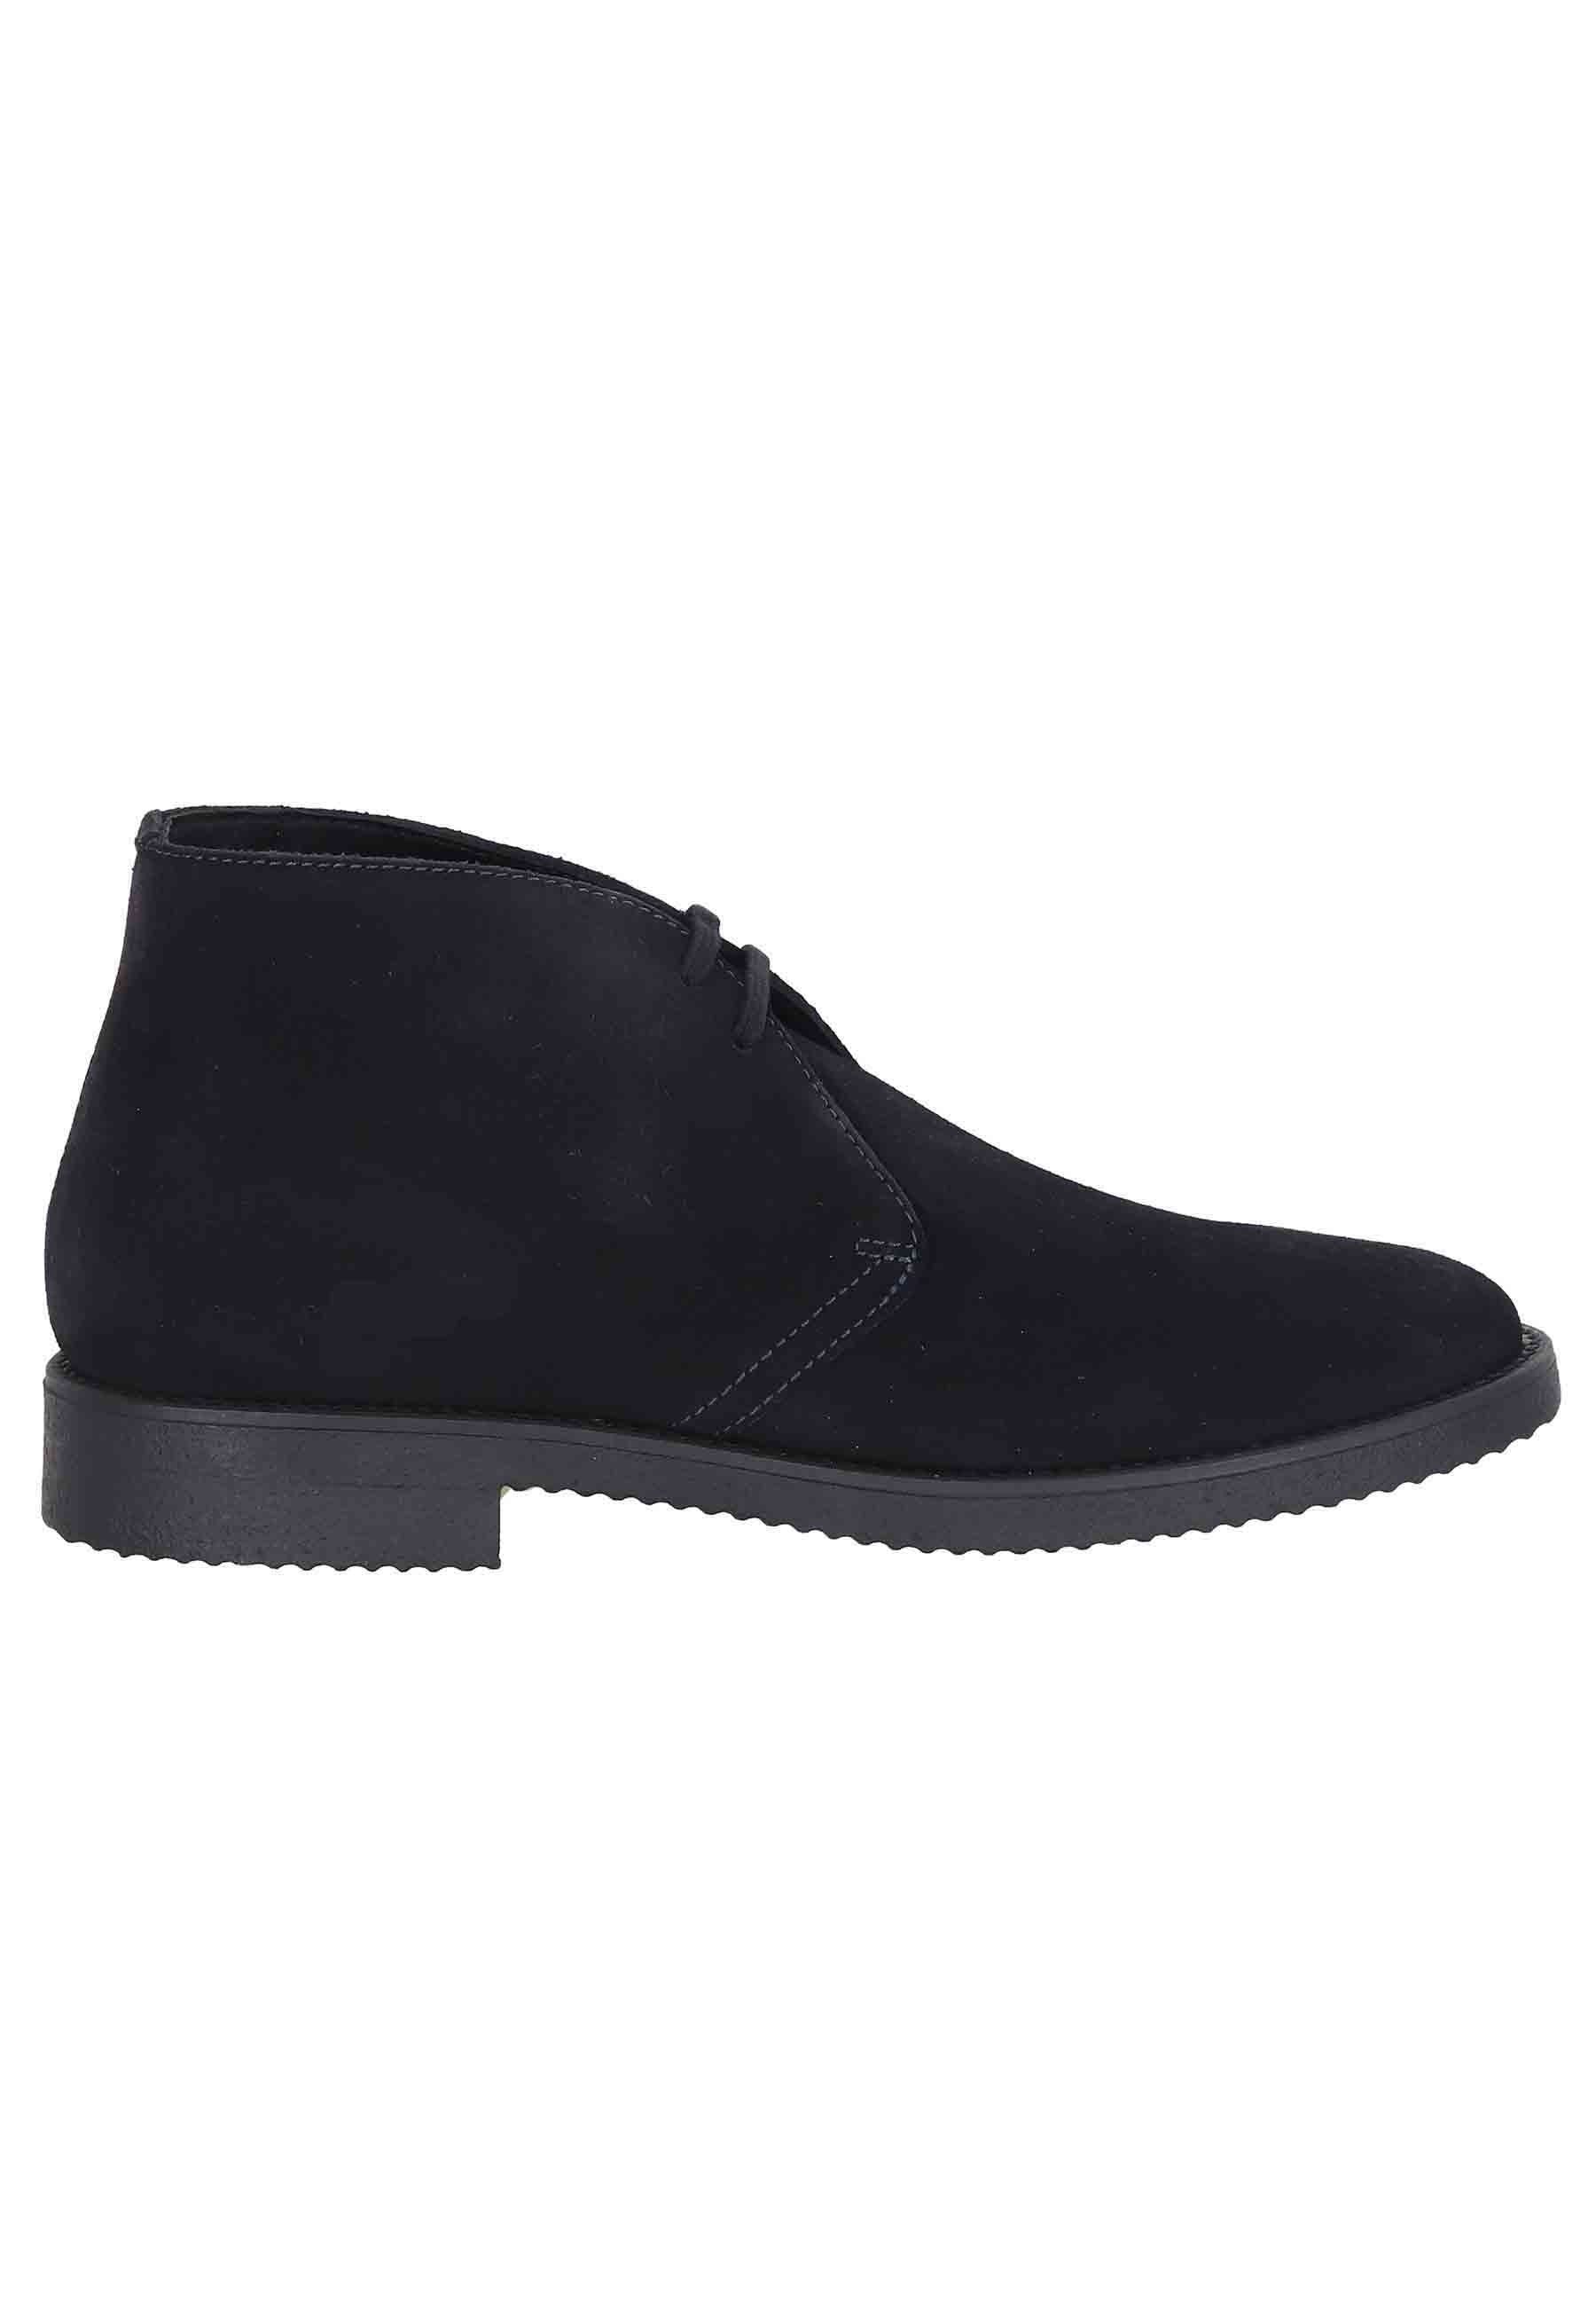 Men's ankle boots in blue suede with crepe sole